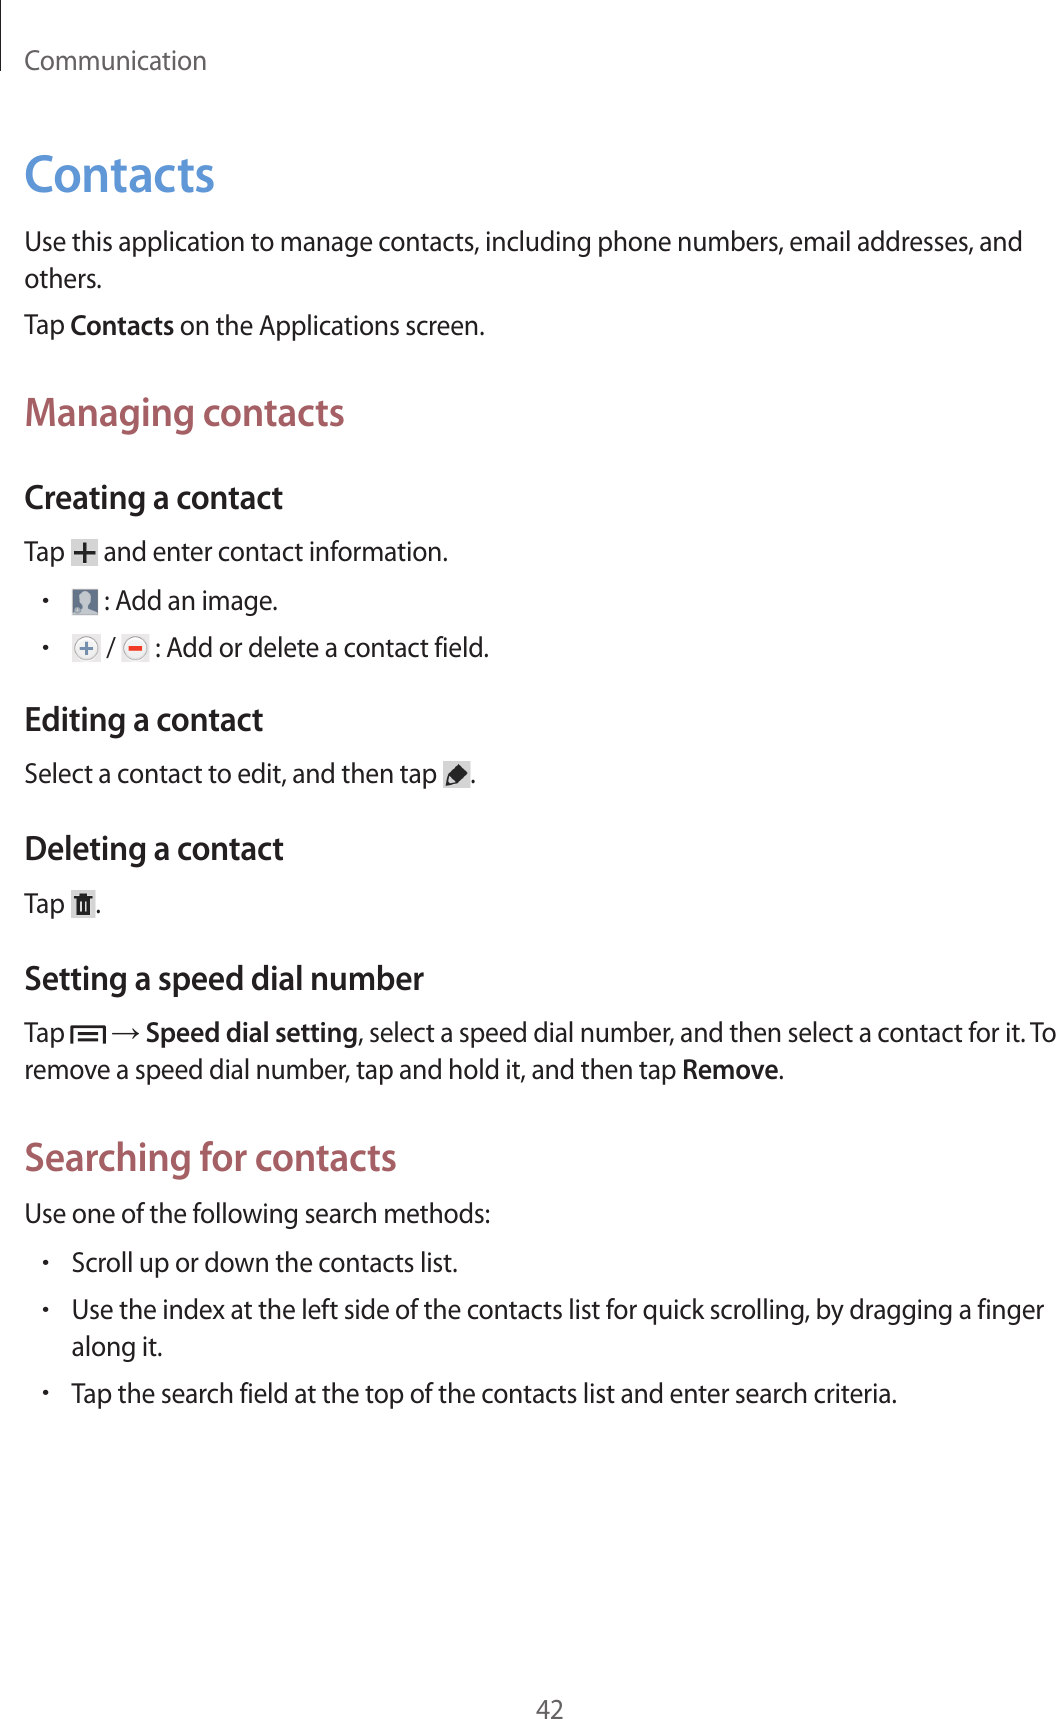 Communication42ContactsUse this application to manage contacts, including phone numbers, email addresses, and others.Tap Contacts on the Applications screen.Managing contactsCreating a contactTap   and enter contact information.• : Add an image.• /   : Add or delete a contact field.Editing a contactSelect a contact to edit, and then tap  .Deleting a contactTap  .Setting a speed dial numberTap   → Speed dial setting, select a speed dial number, and then select a contact for it. To remove a speed dial number, tap and hold it, and then tap Remove.Searching for contactsUse one of the following search methods:•Scroll up or down the contacts list.•Use the index at the left side of the contacts list for quick scrolling, by dragging a finger along it.•Tap the search field at the top of the contacts list and enter search criteria.